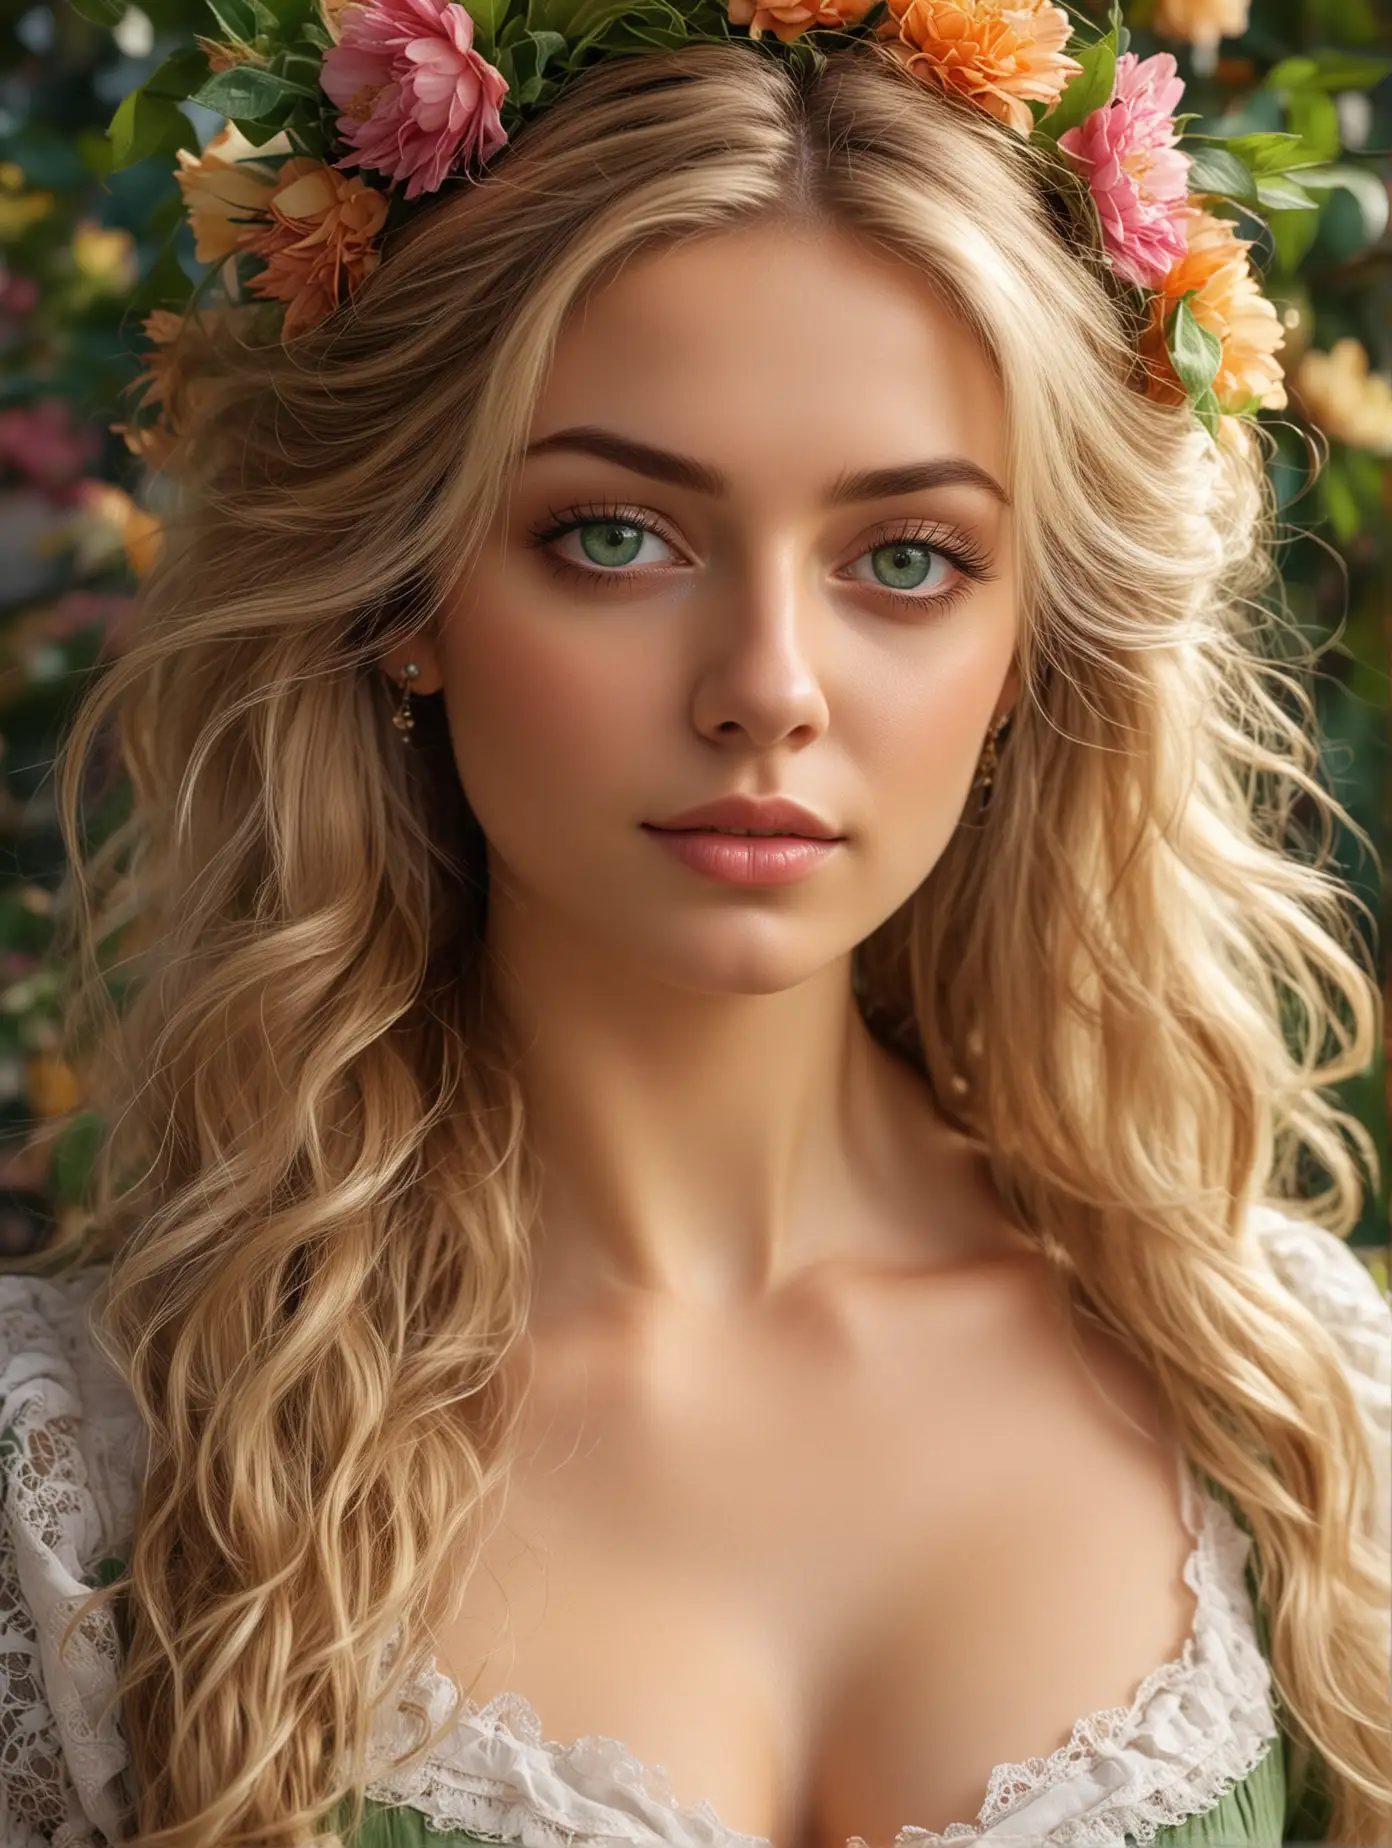 Ethereal Victorian Woman with Wispy Blonde Hair Amid Colorful Flowers